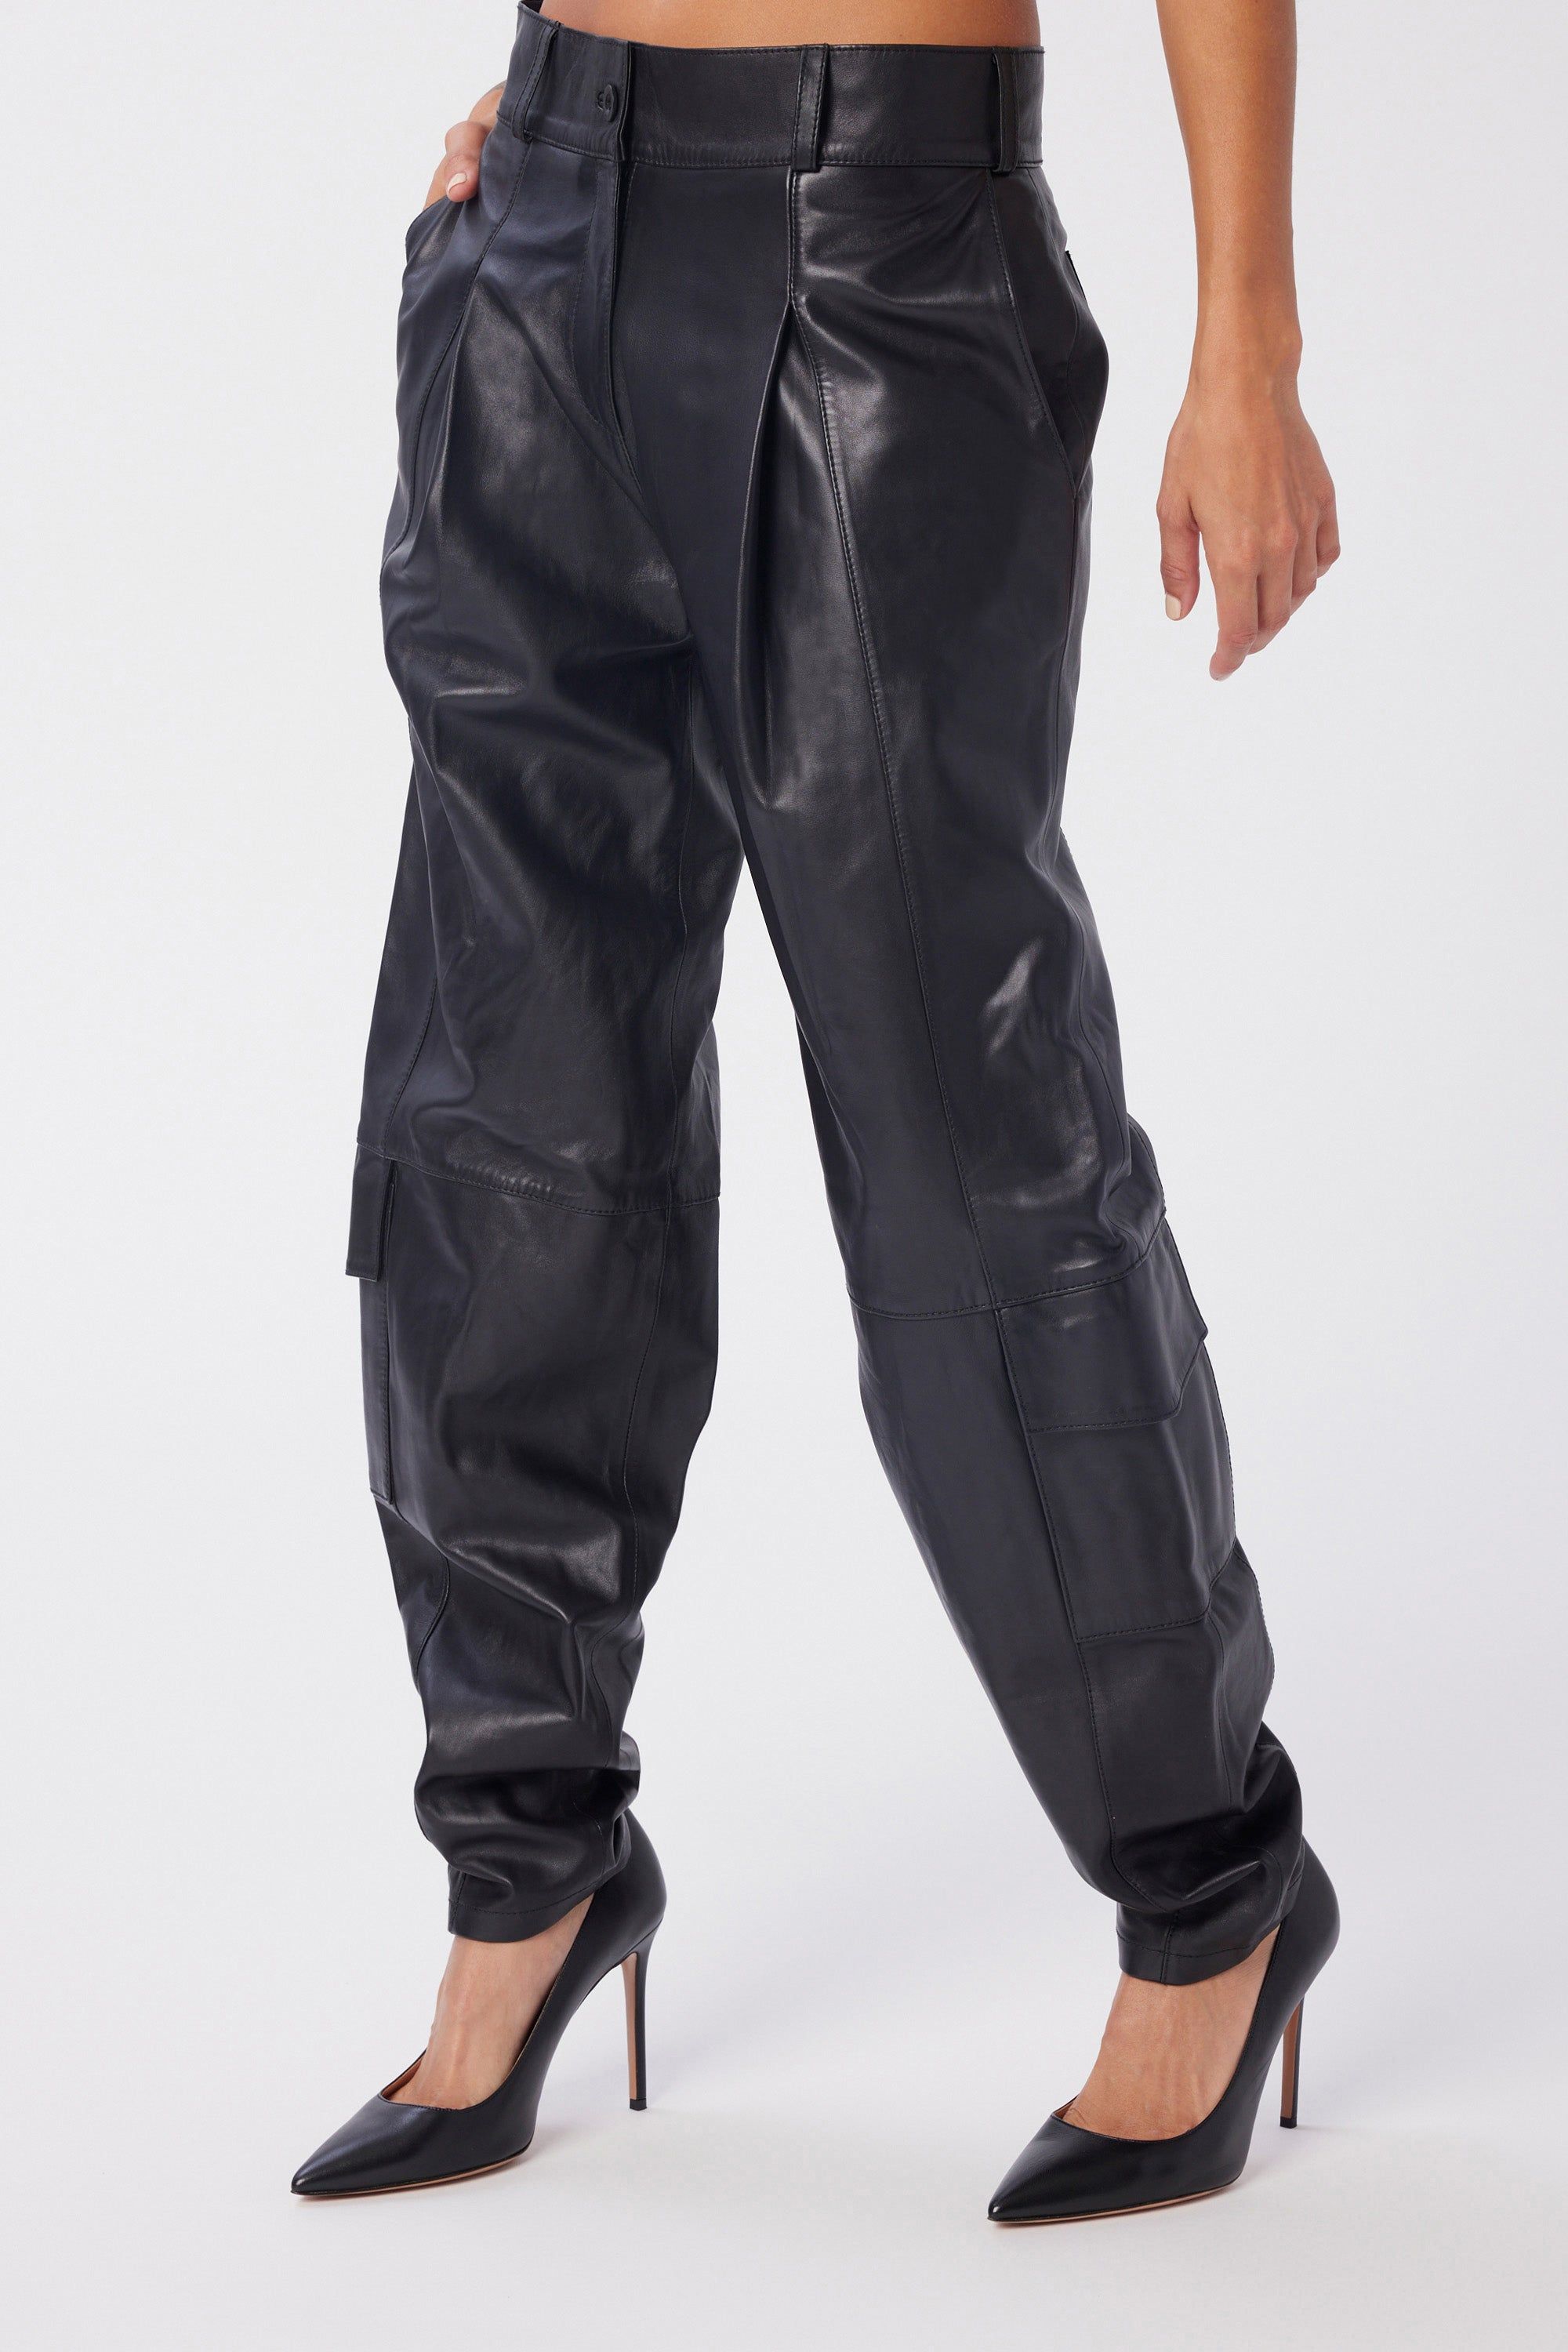 REMAIN Gracele Leather Pants in Tan